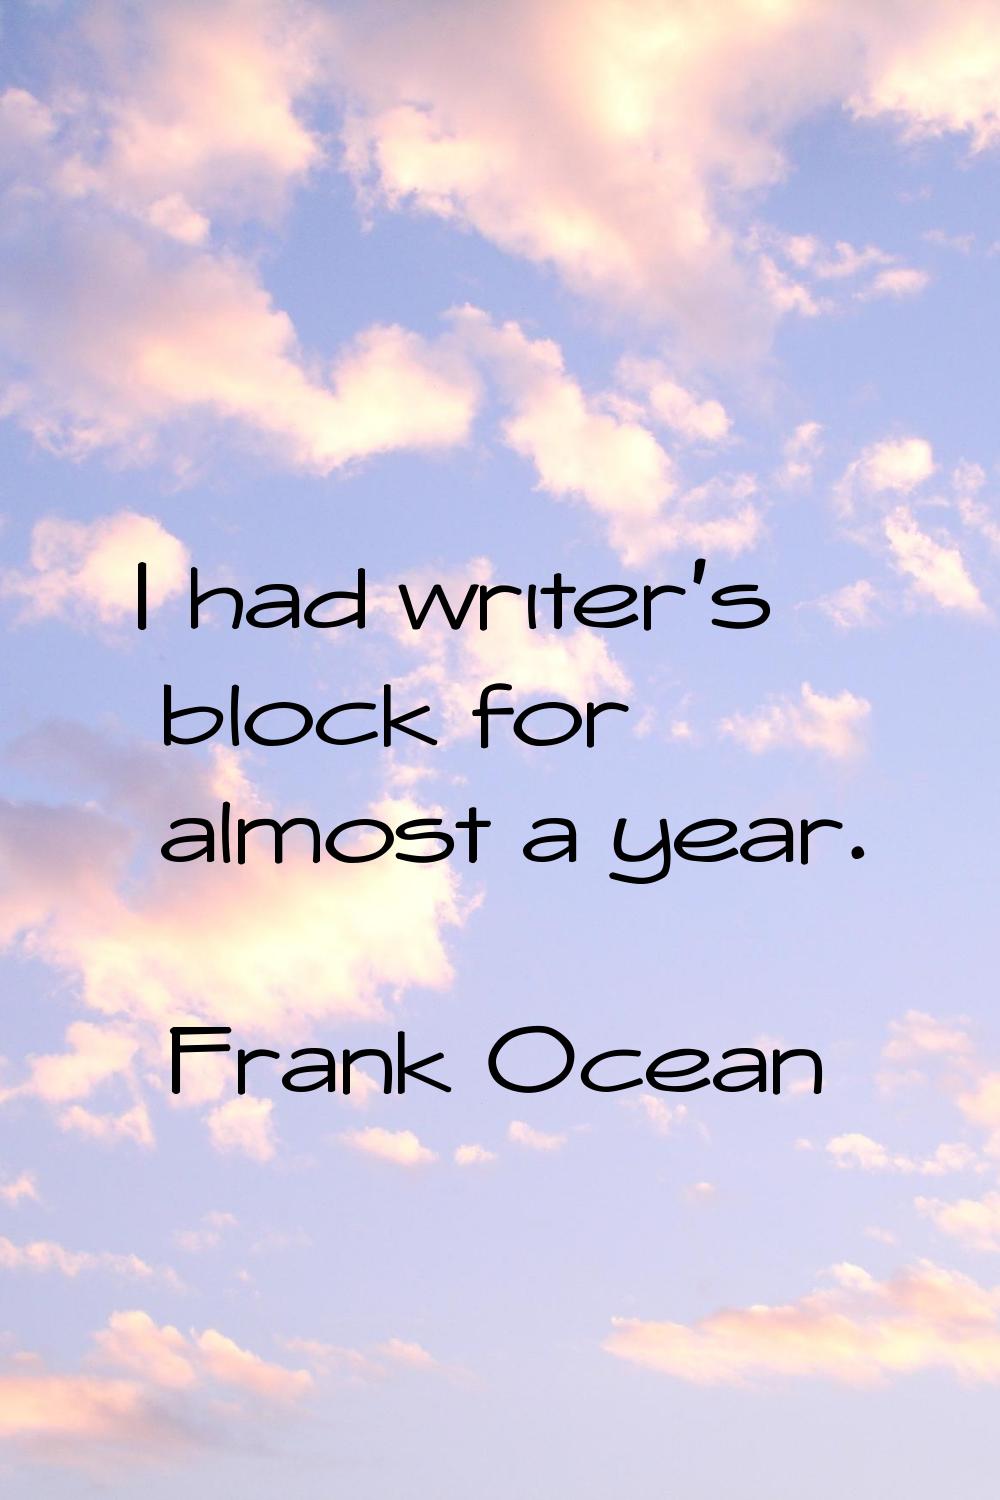 I had writer's block for almost a year.